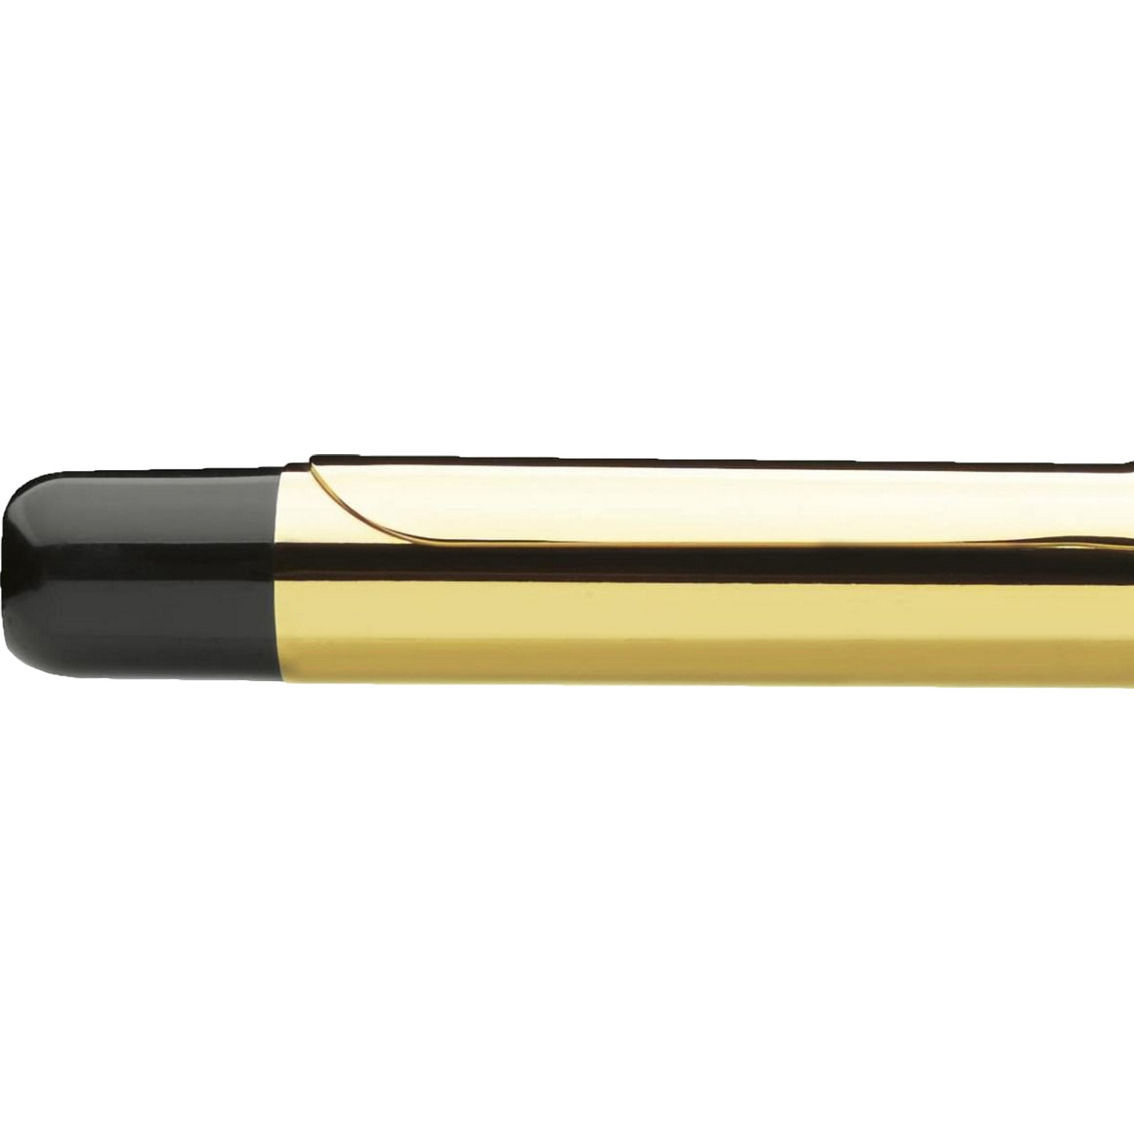 Hot Tools Signature Series 1 in. Gold Curling Iron Wand - Image 3 of 5